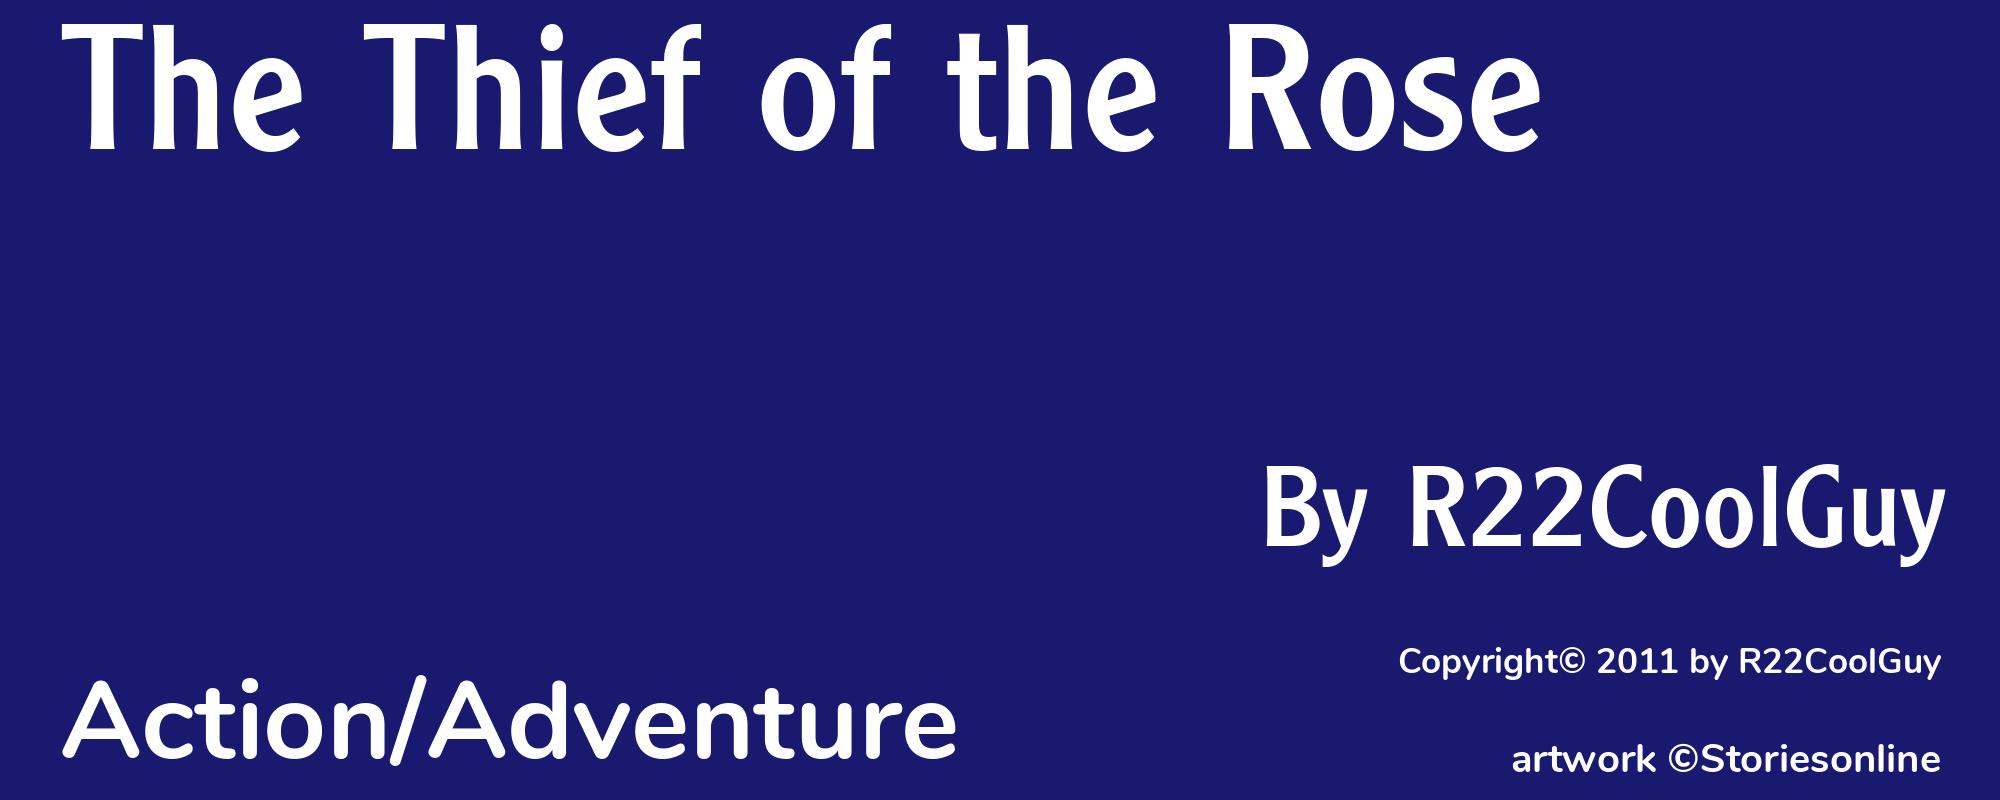 The Thief of the Rose - Cover